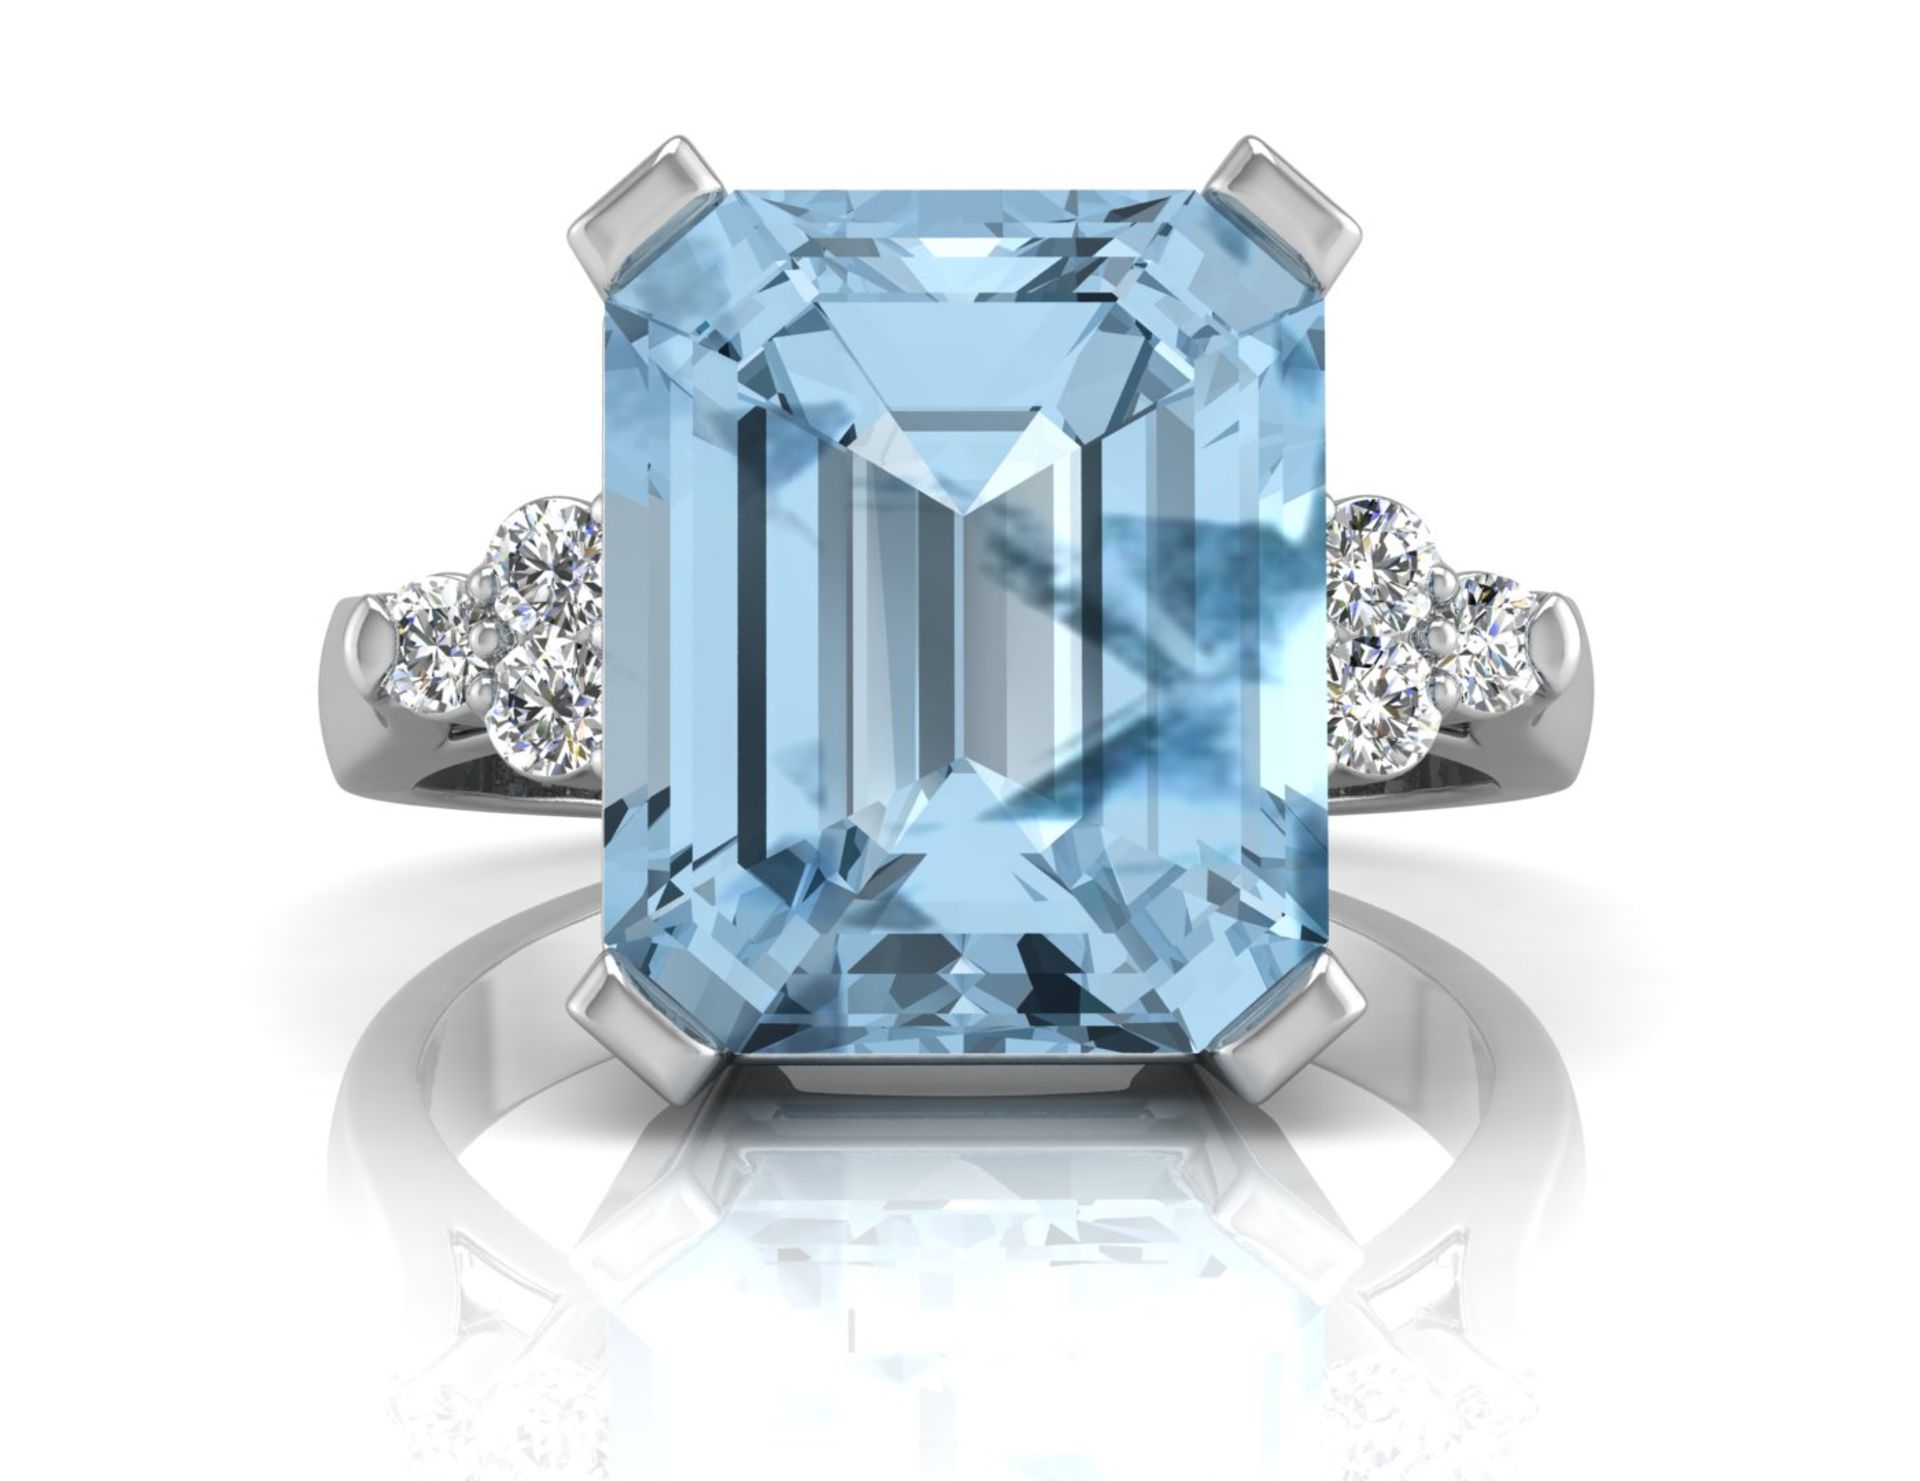 9ct White Gold Diamond And Blue Topaz Ring 0.18 Carats - Valued by GIE £3,995.00 - 9ct White Gold - Image 4 of 5